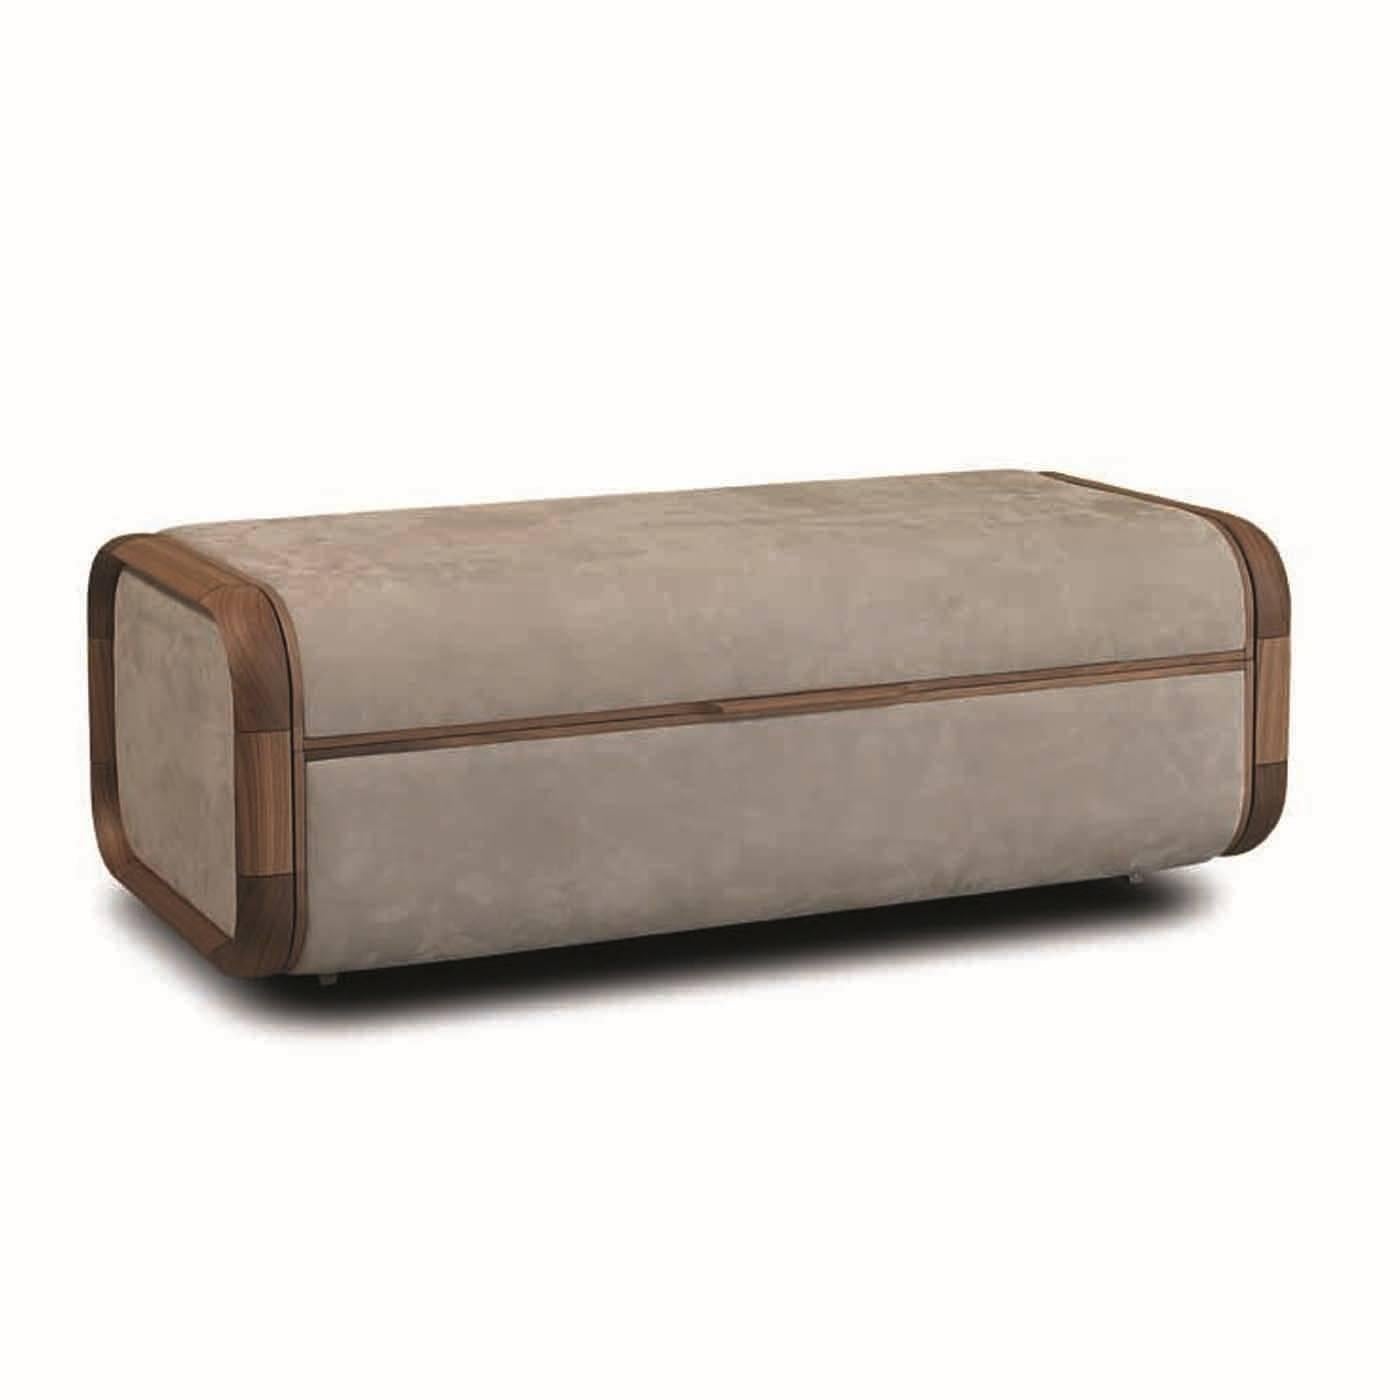 This elegant trunk is made entirely in walnut wood and its rectangular shape is rounded at the corners, the signature Ulivi style. Two leather panels with a strikingly complementing grey color upholster the top and bottom of the piece, covering also